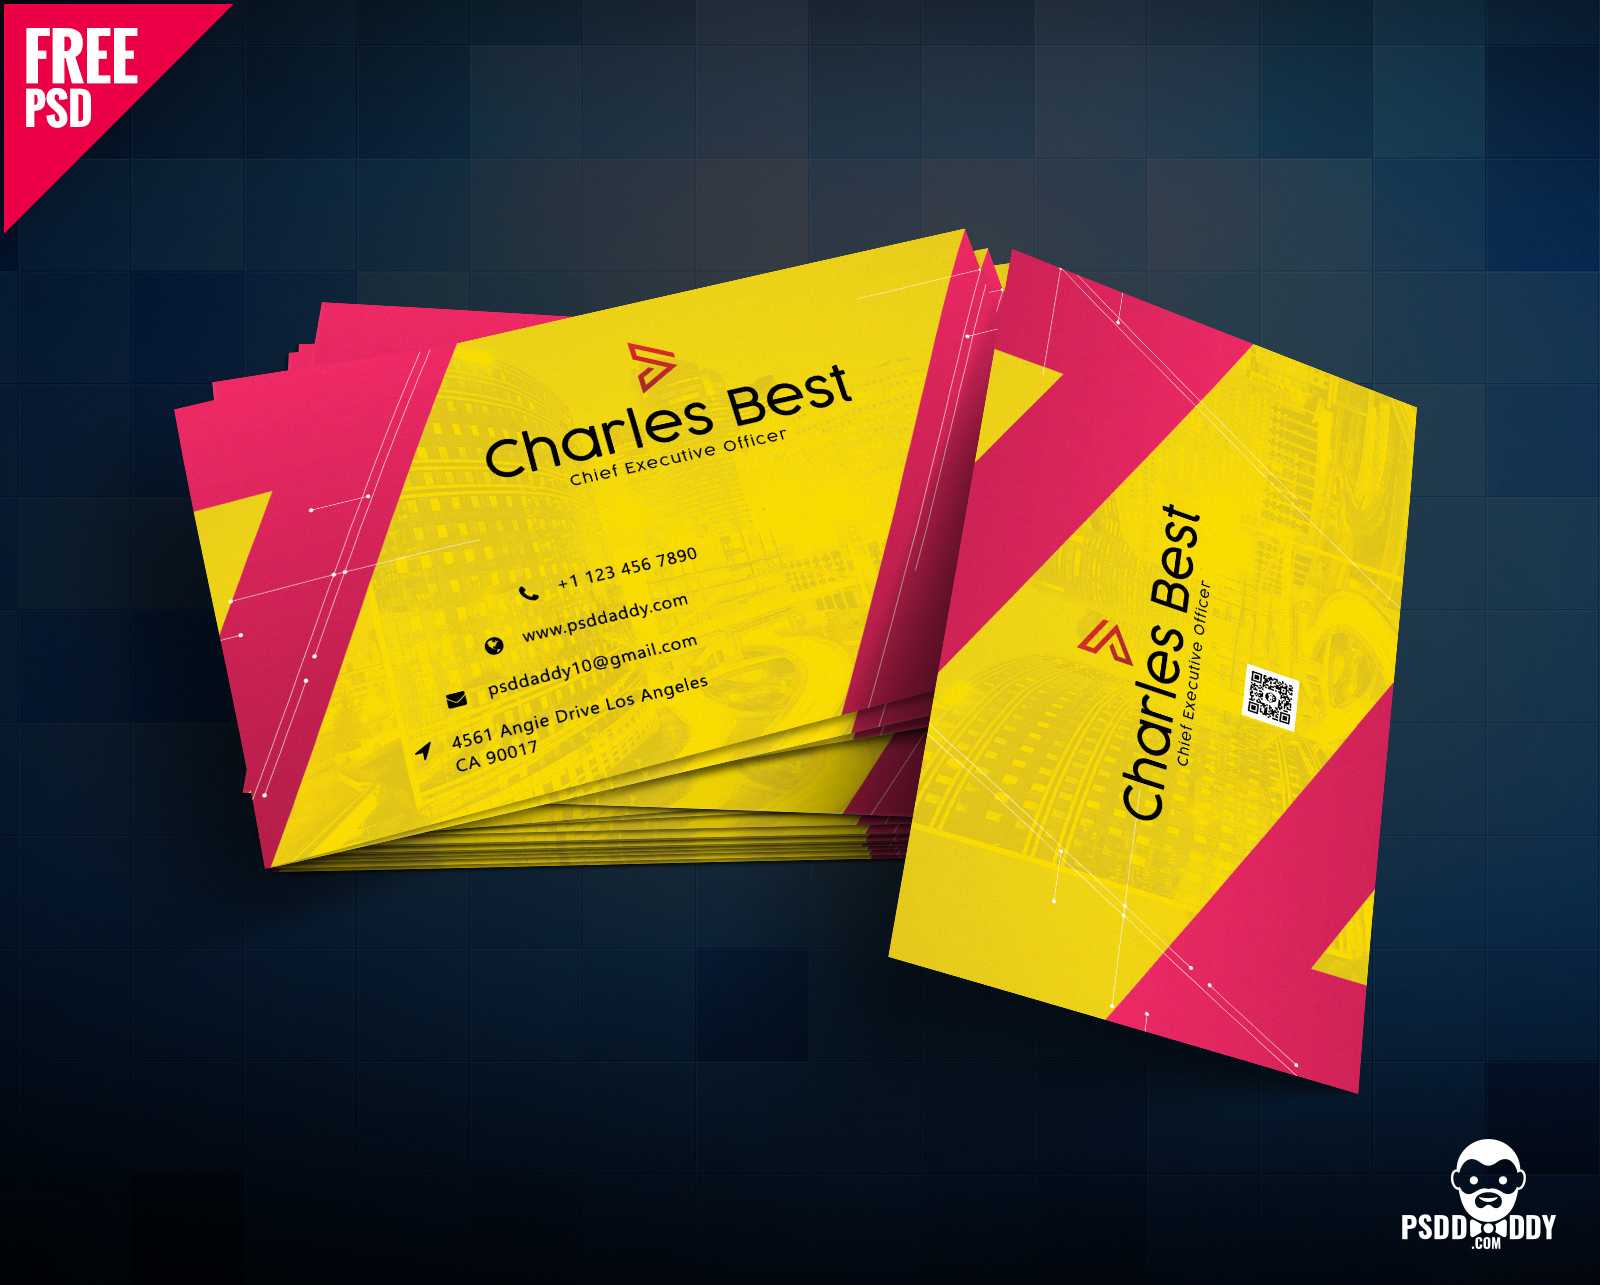 Download] Creative Business Card Free Psd | Psddaddy Intended For Name Card Photoshop Template